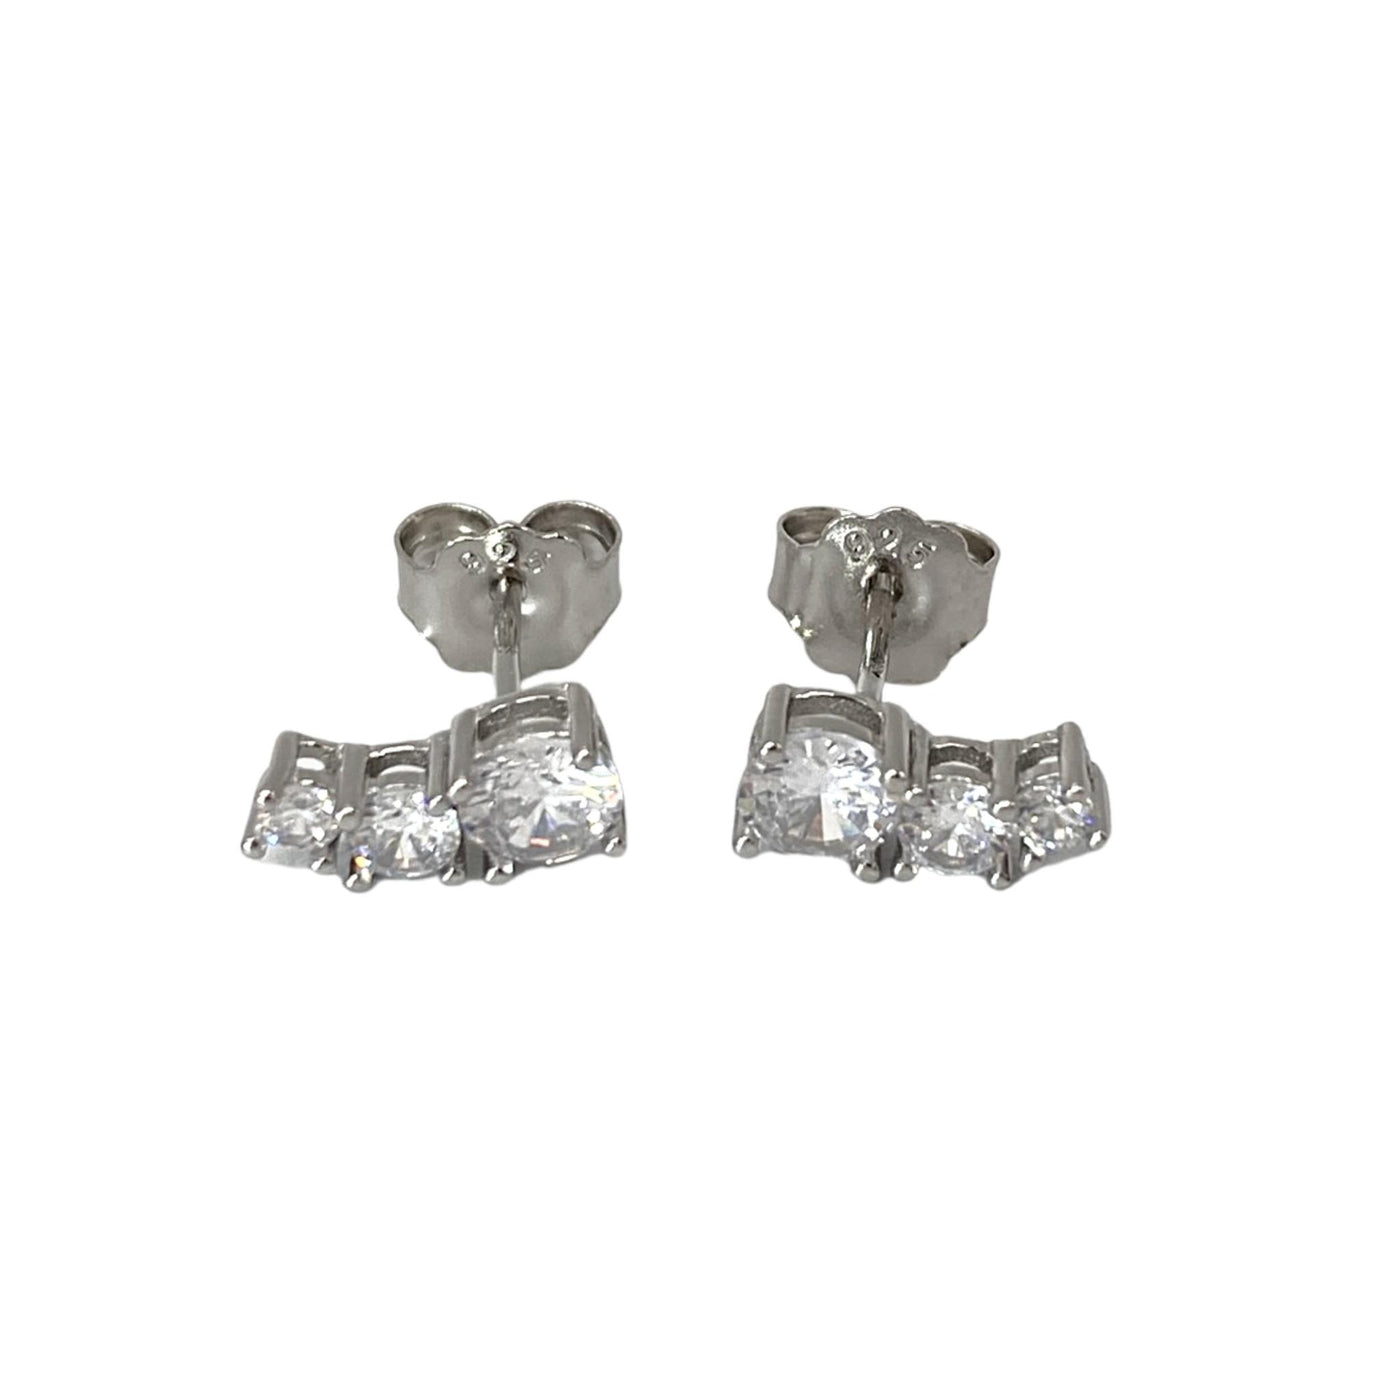 Silver earrings with 3 white zirconia